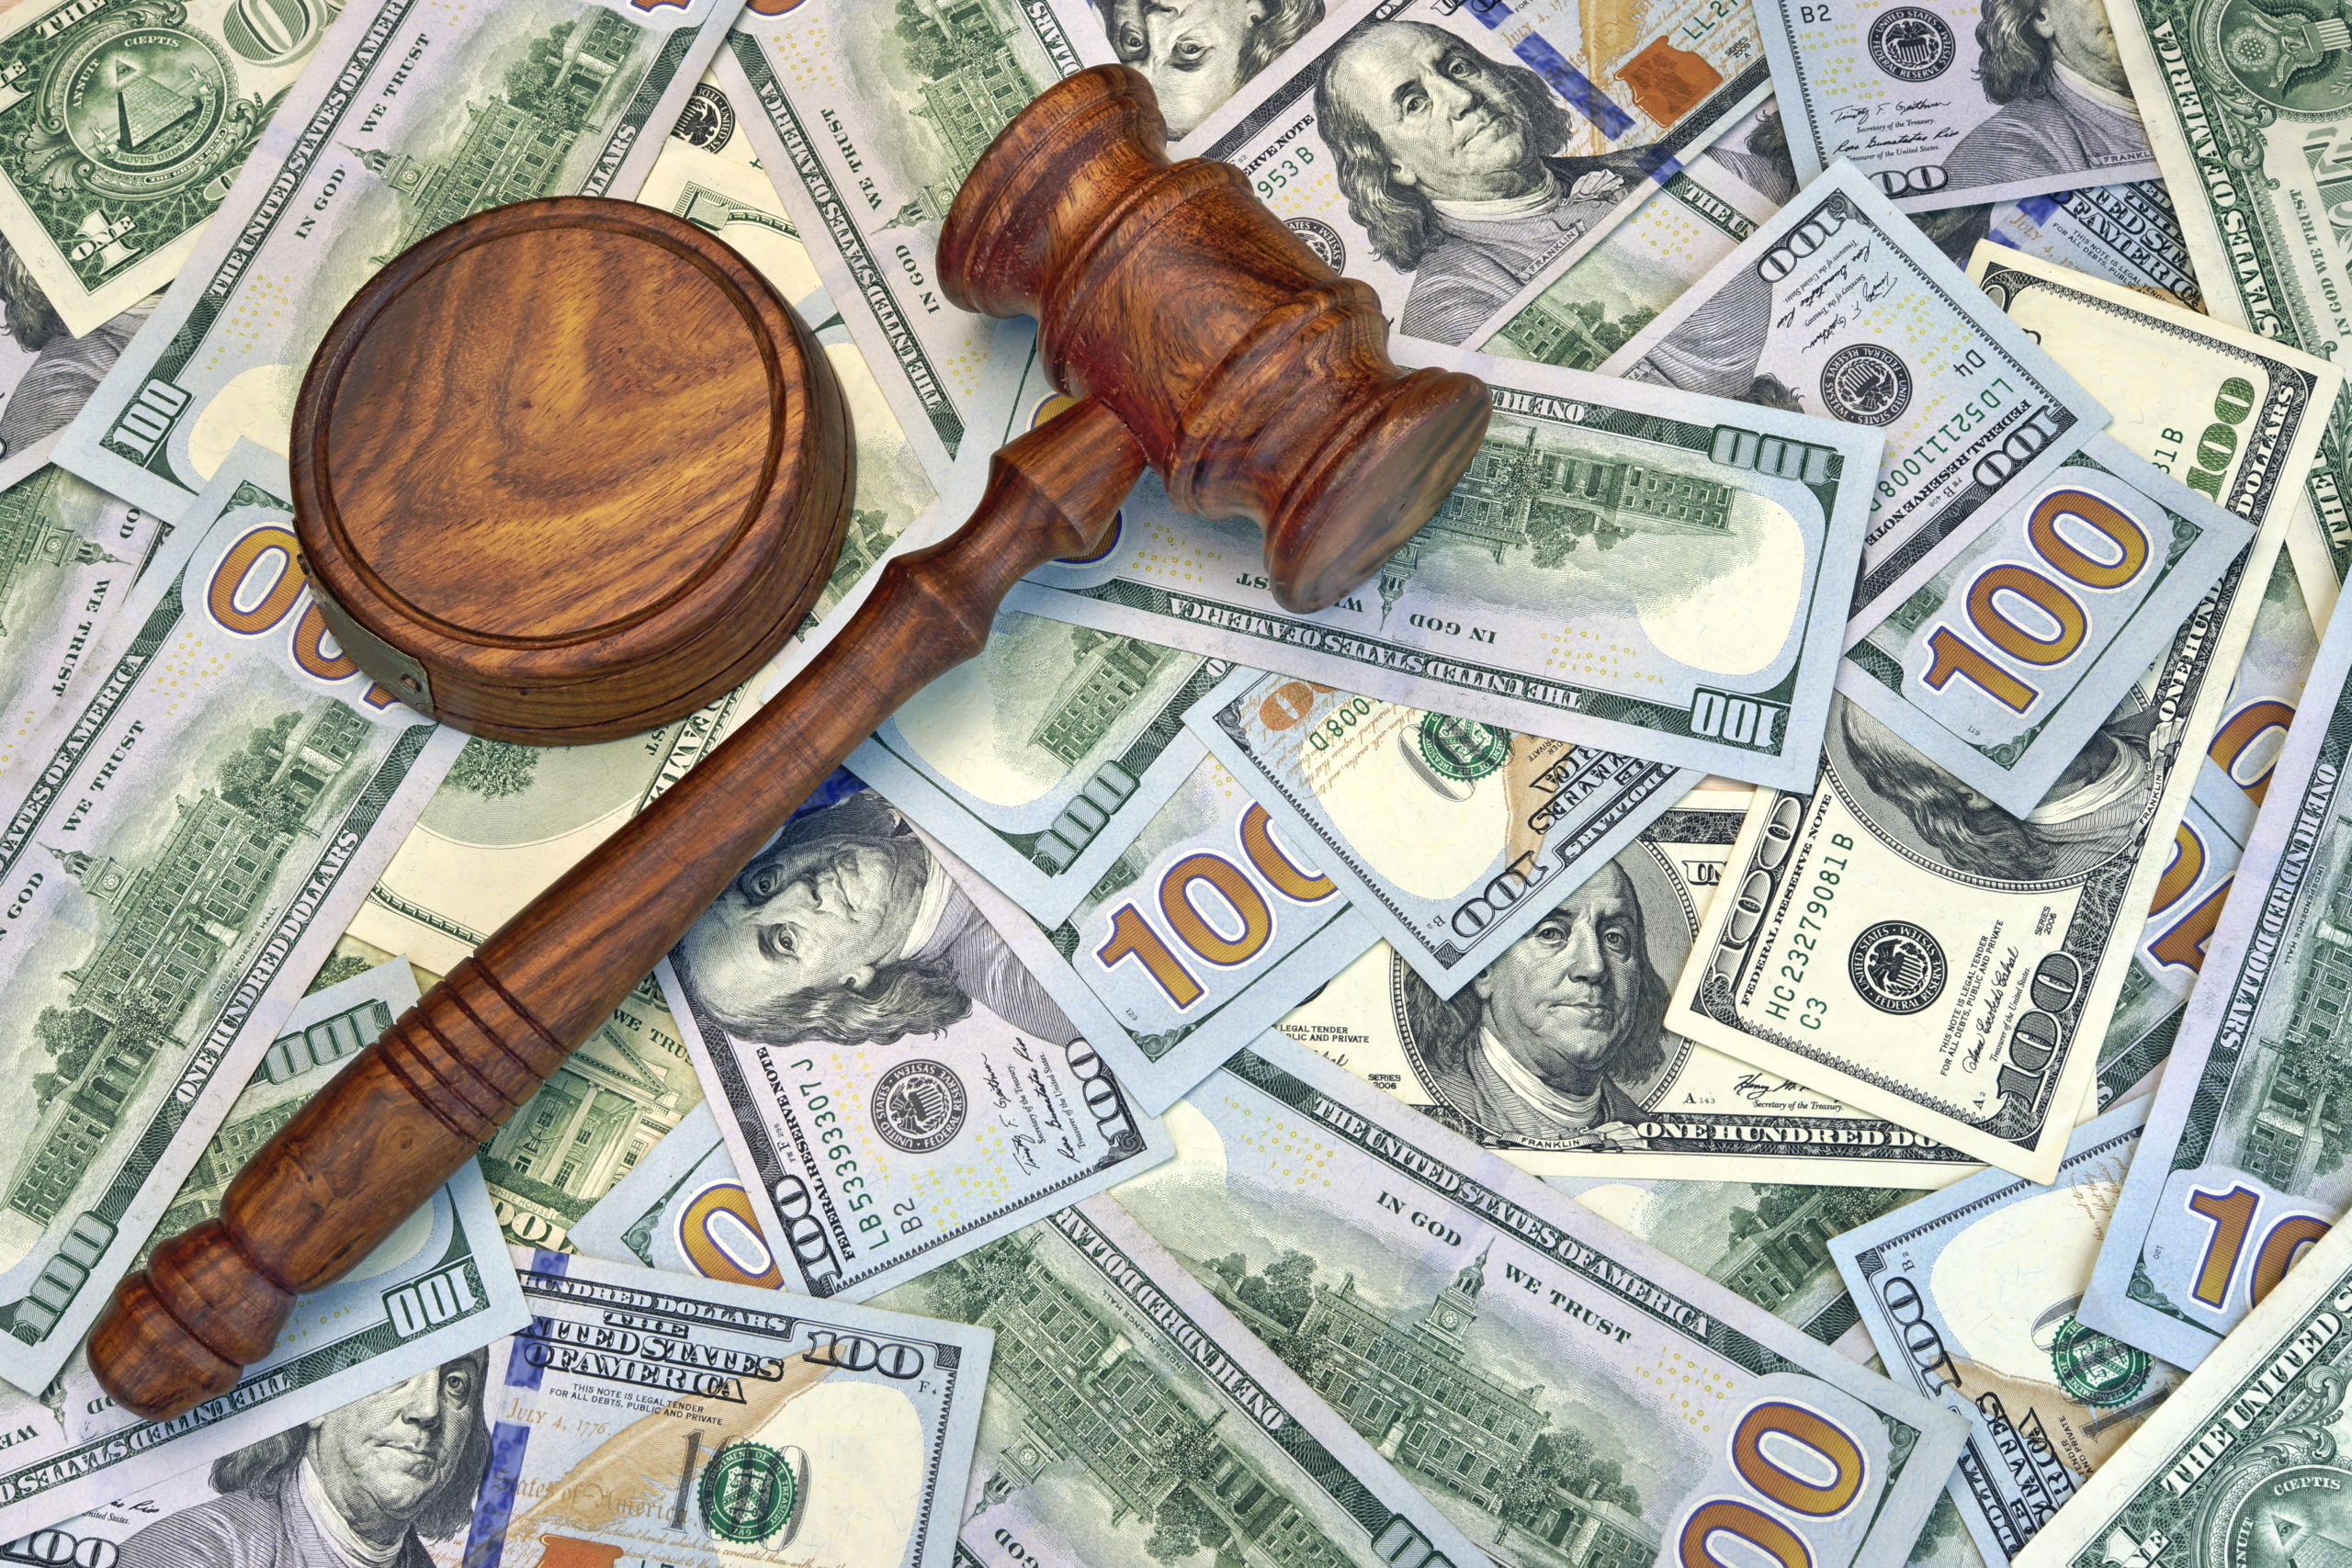 What do I need to know about lawsuit loan companies when researching a lawsuit advance?